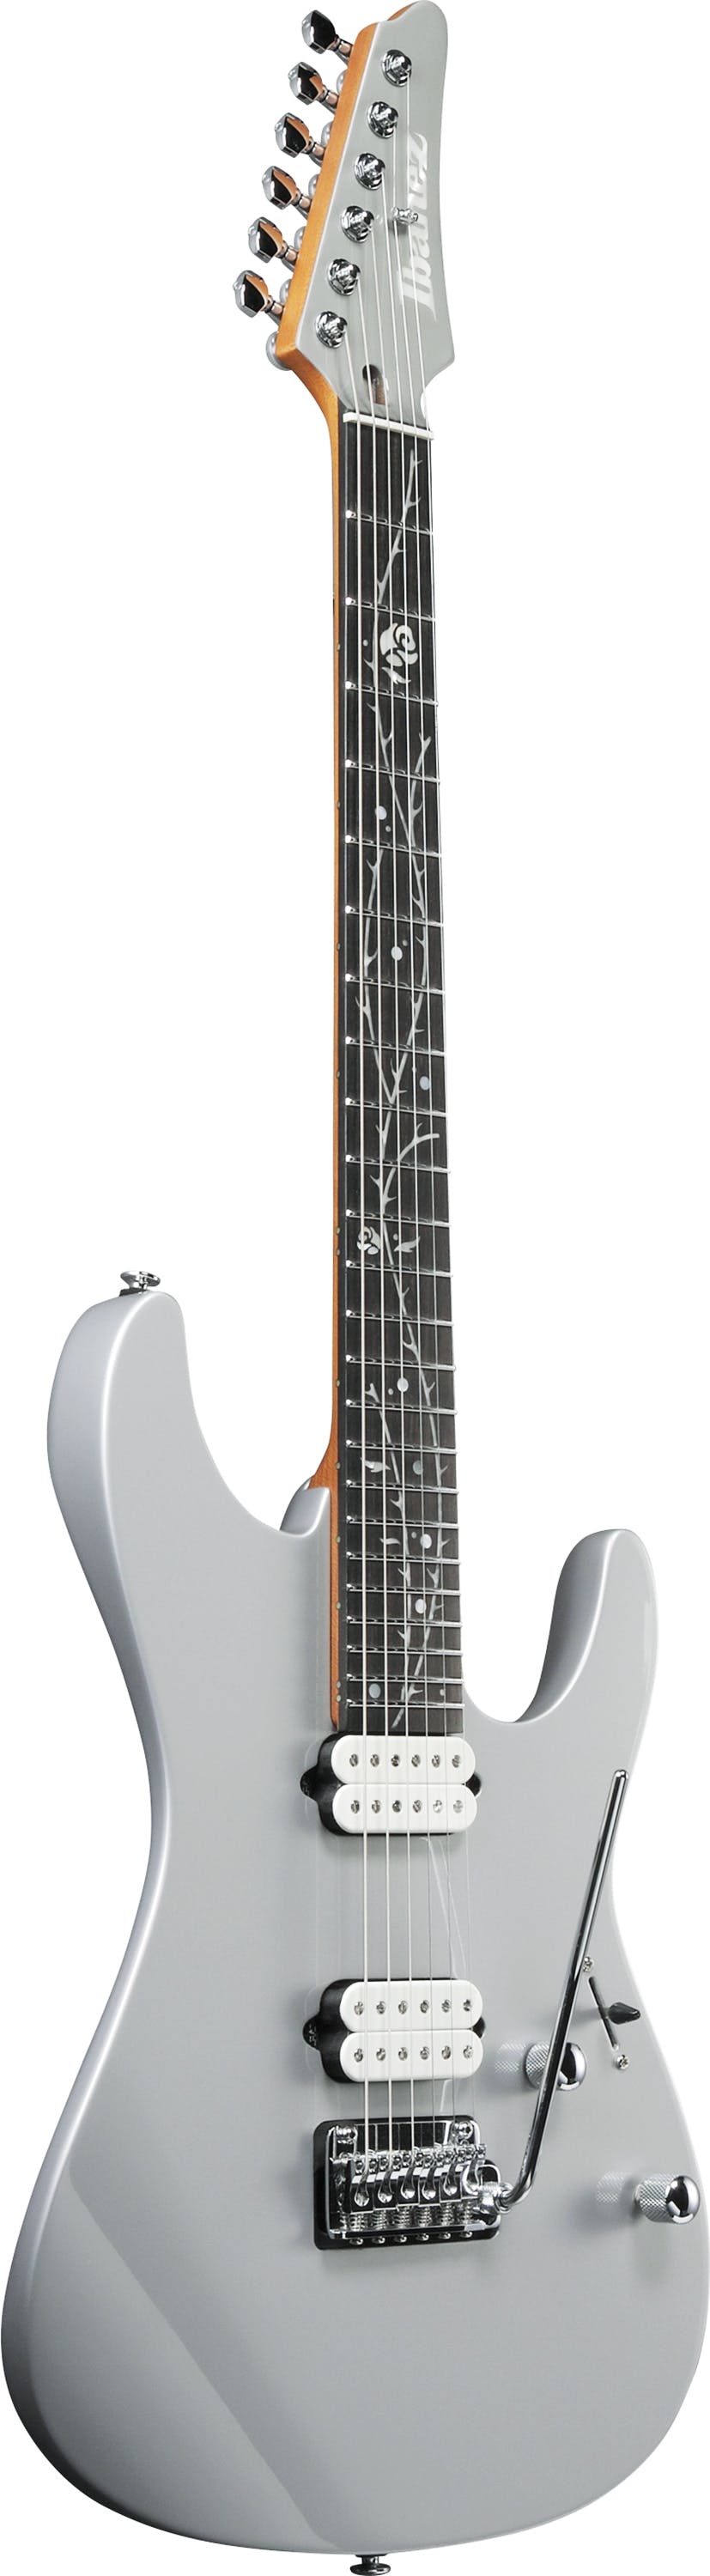 Ibanez TOD10 Tim Henson Signature Electric Guitar in Silver - Andertons